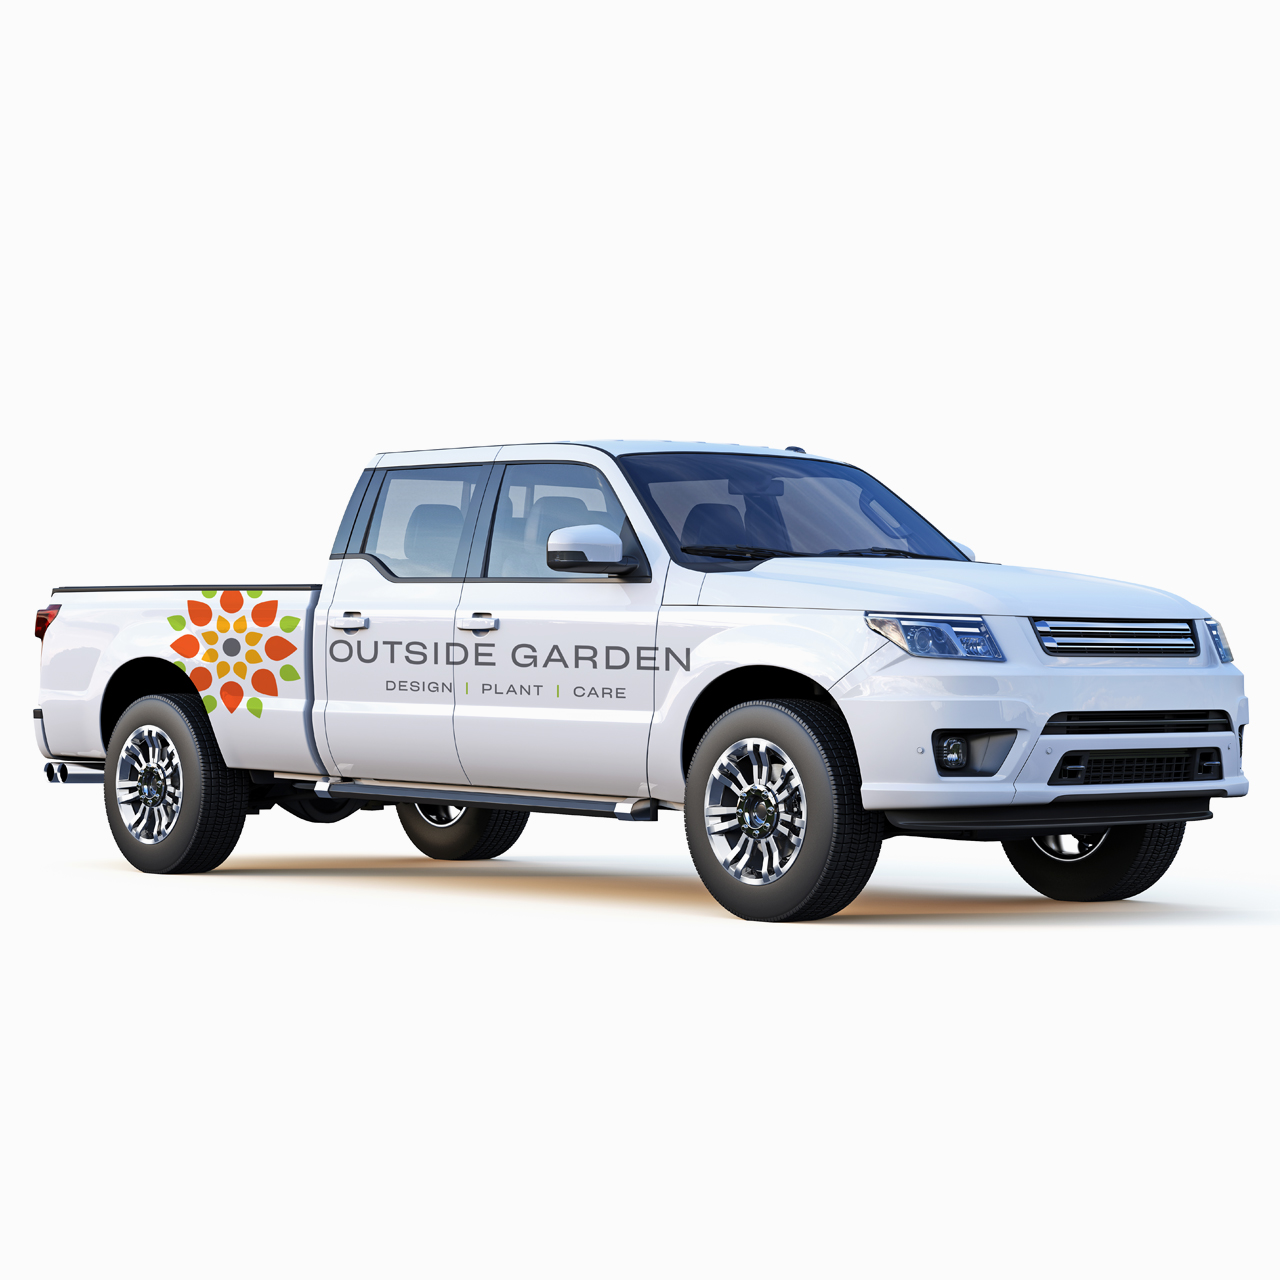 An image of Outside Garden's work truck with colorful graphics